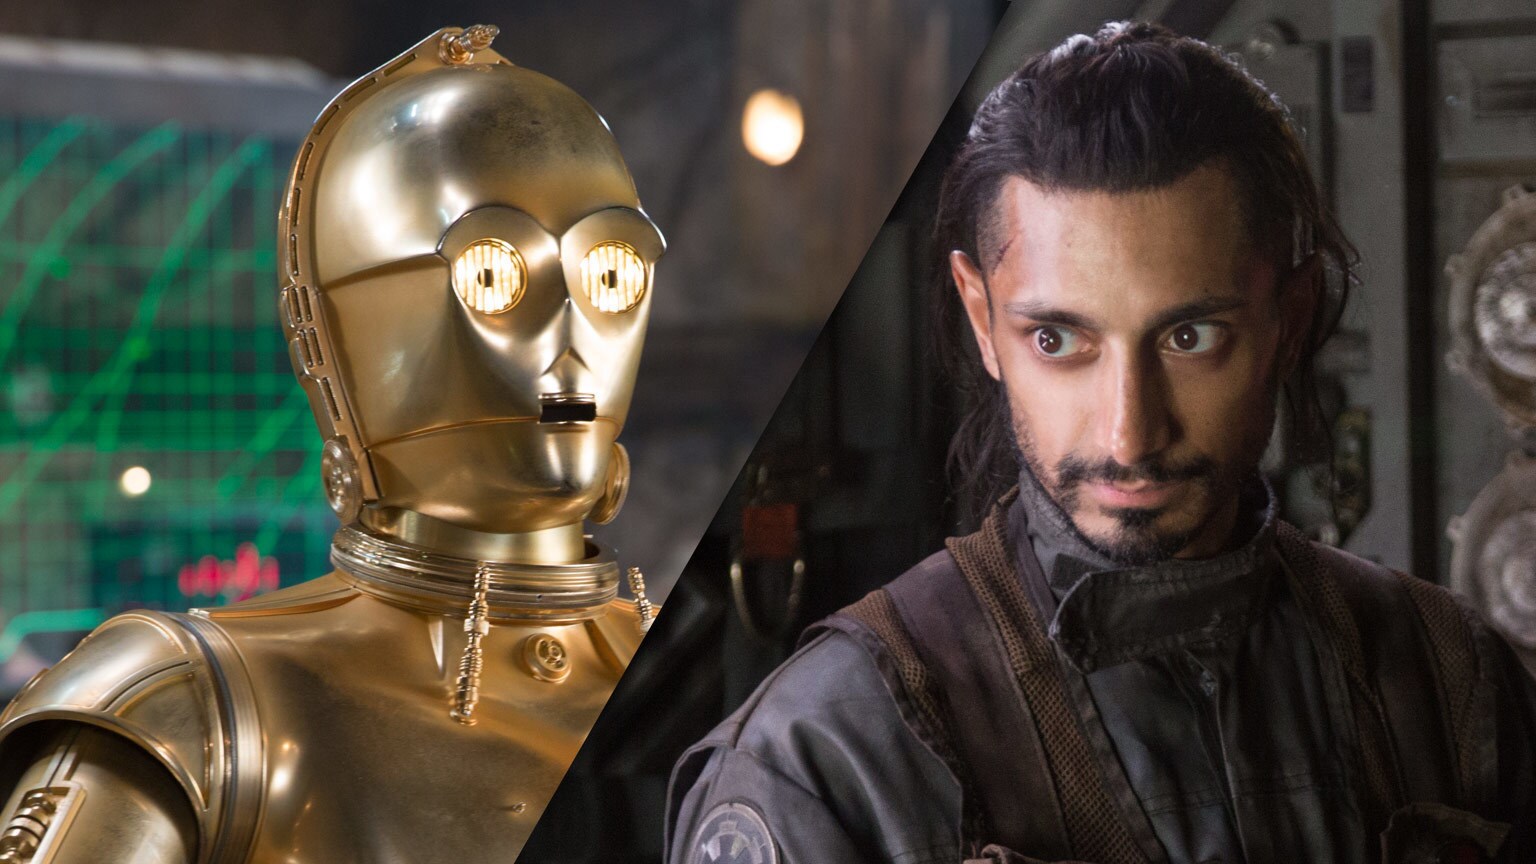 Anthony Daniels and Riz Ahmed Coming to Star Wars Celebration Orlando